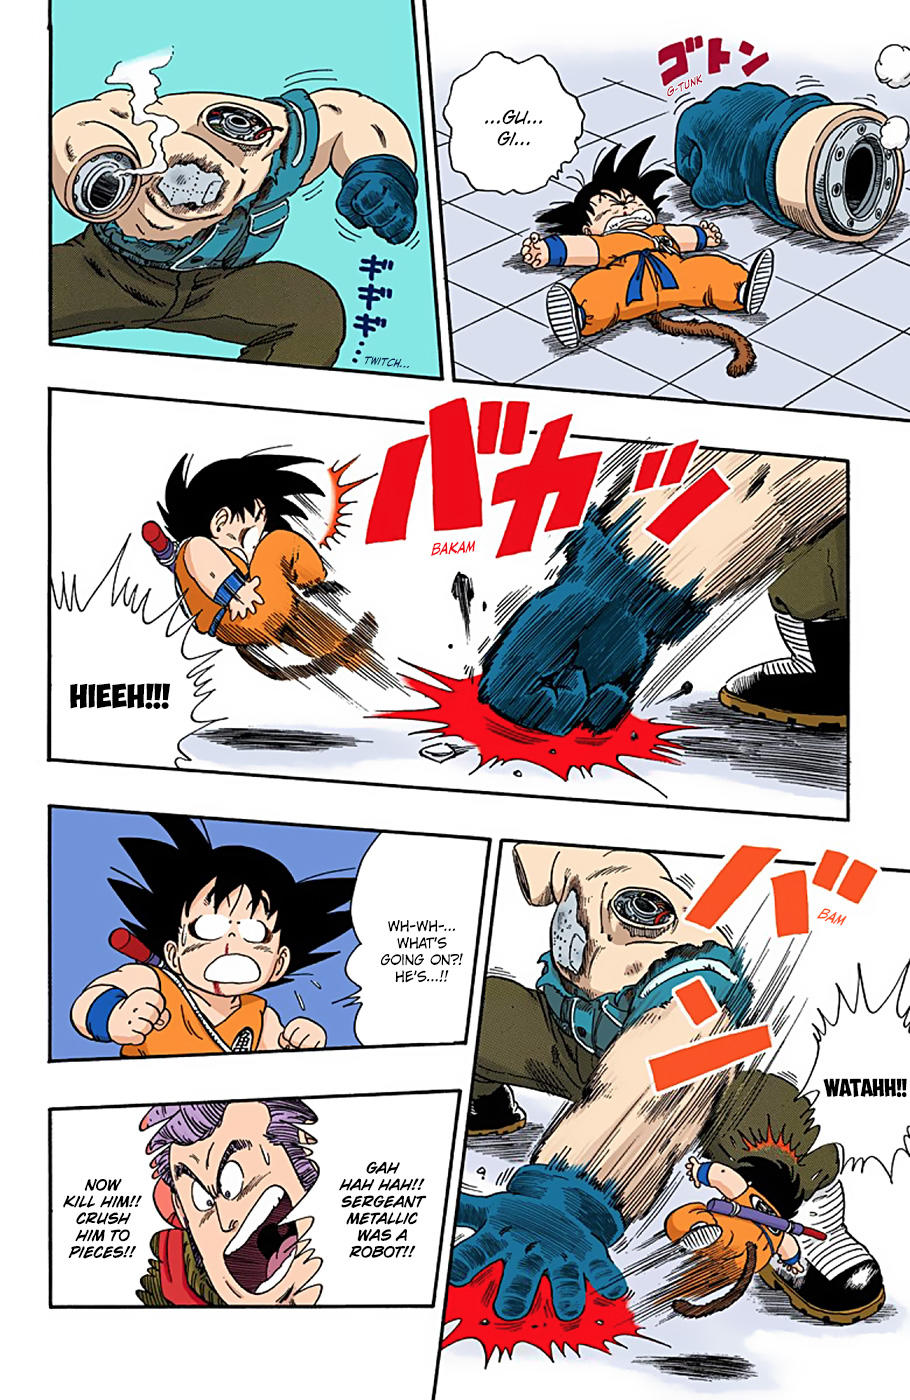 Dragon Ball - Full Color Edition Vol.5 Chapter 59: The Demon On The Third Floor!! page 14 - Mangakakalot